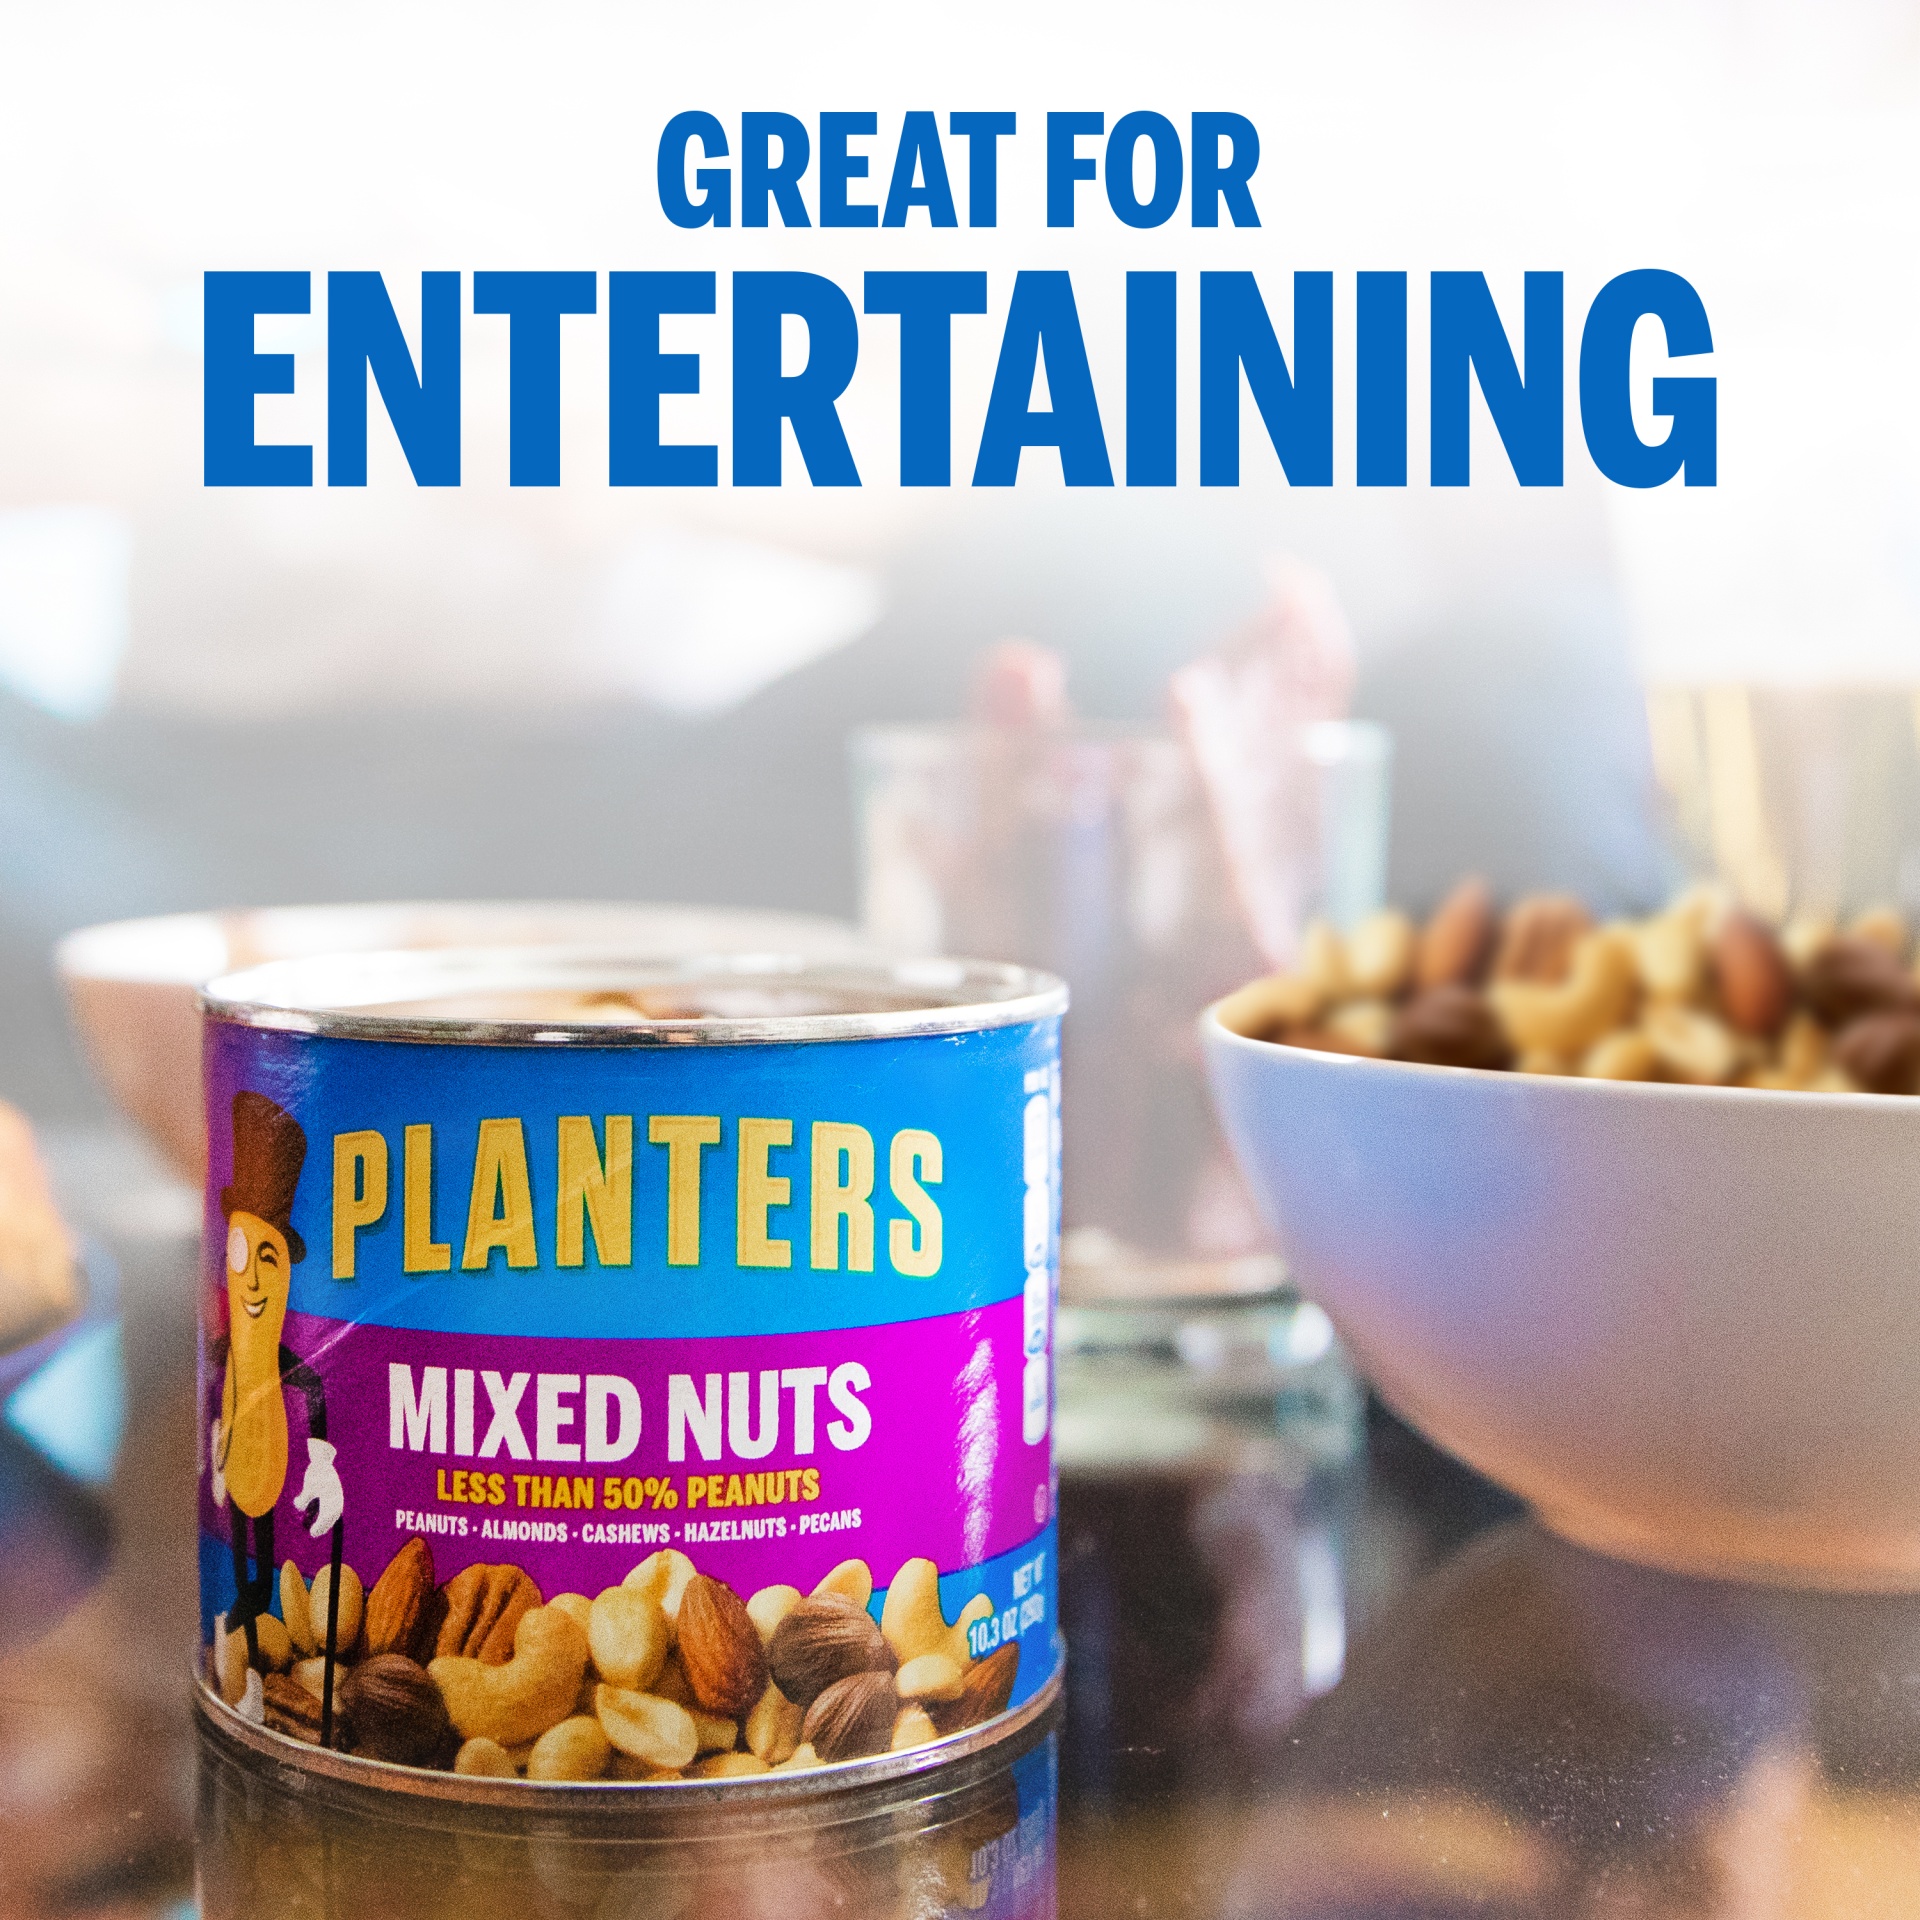 slide 3 of 15, Planters Mixed Nuts Less Than 50% Peanuts with Peanuts, Almonds, Cashews, Hazelnuts & Pecans, 10.3 oz